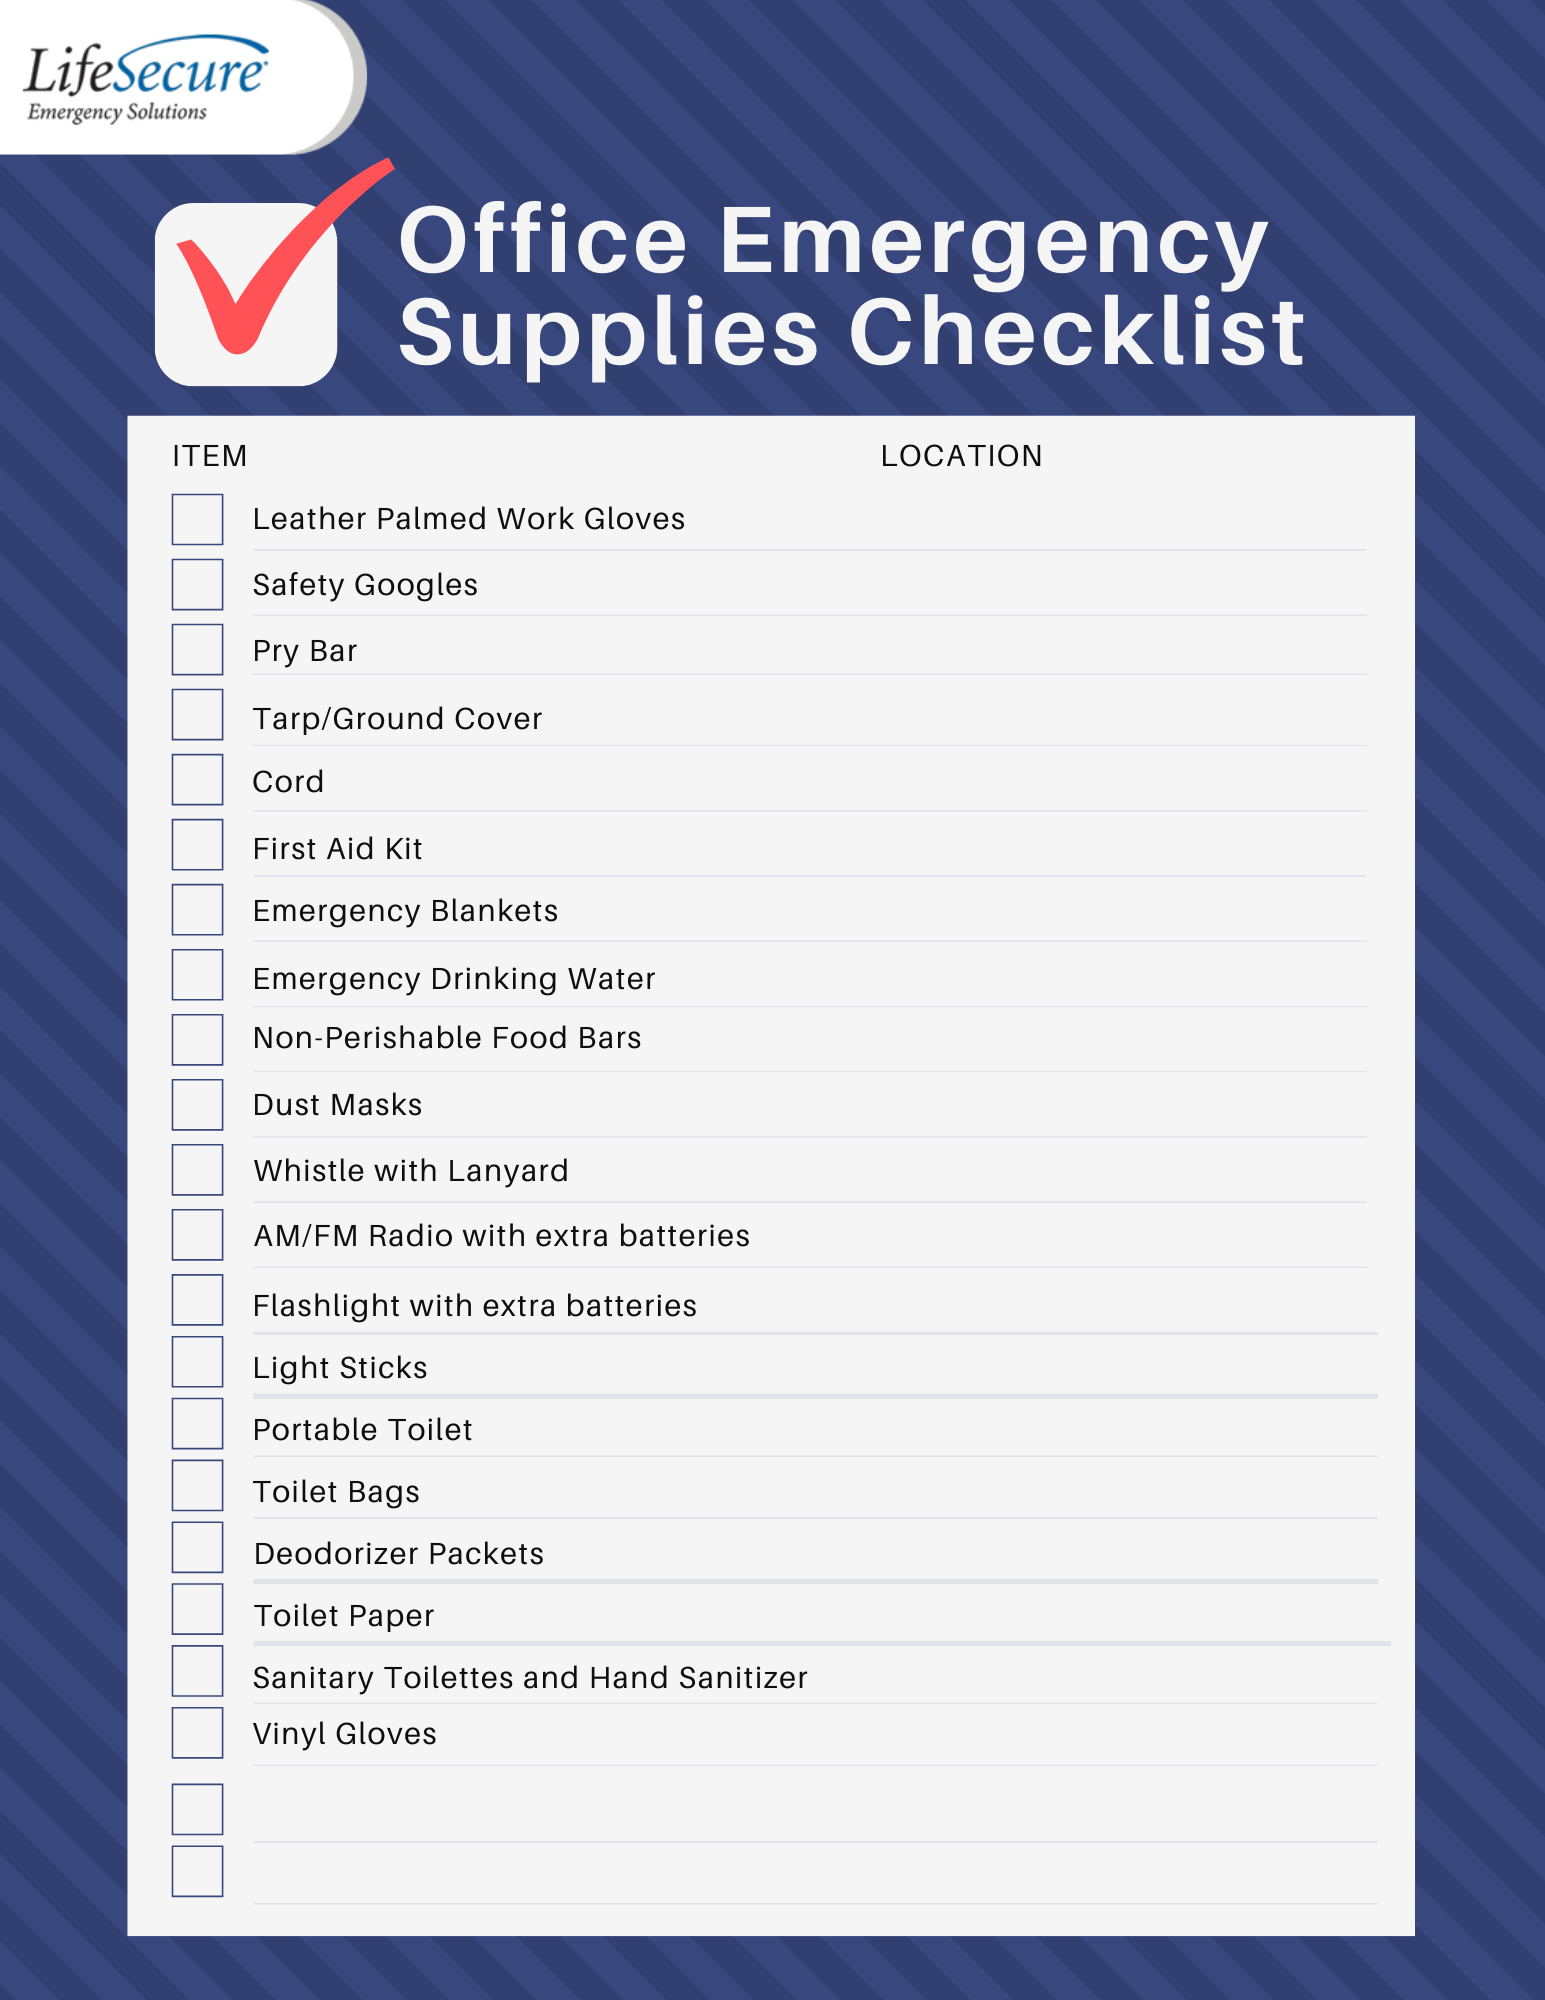 office-emergency-supplies-checklist-lifesecure